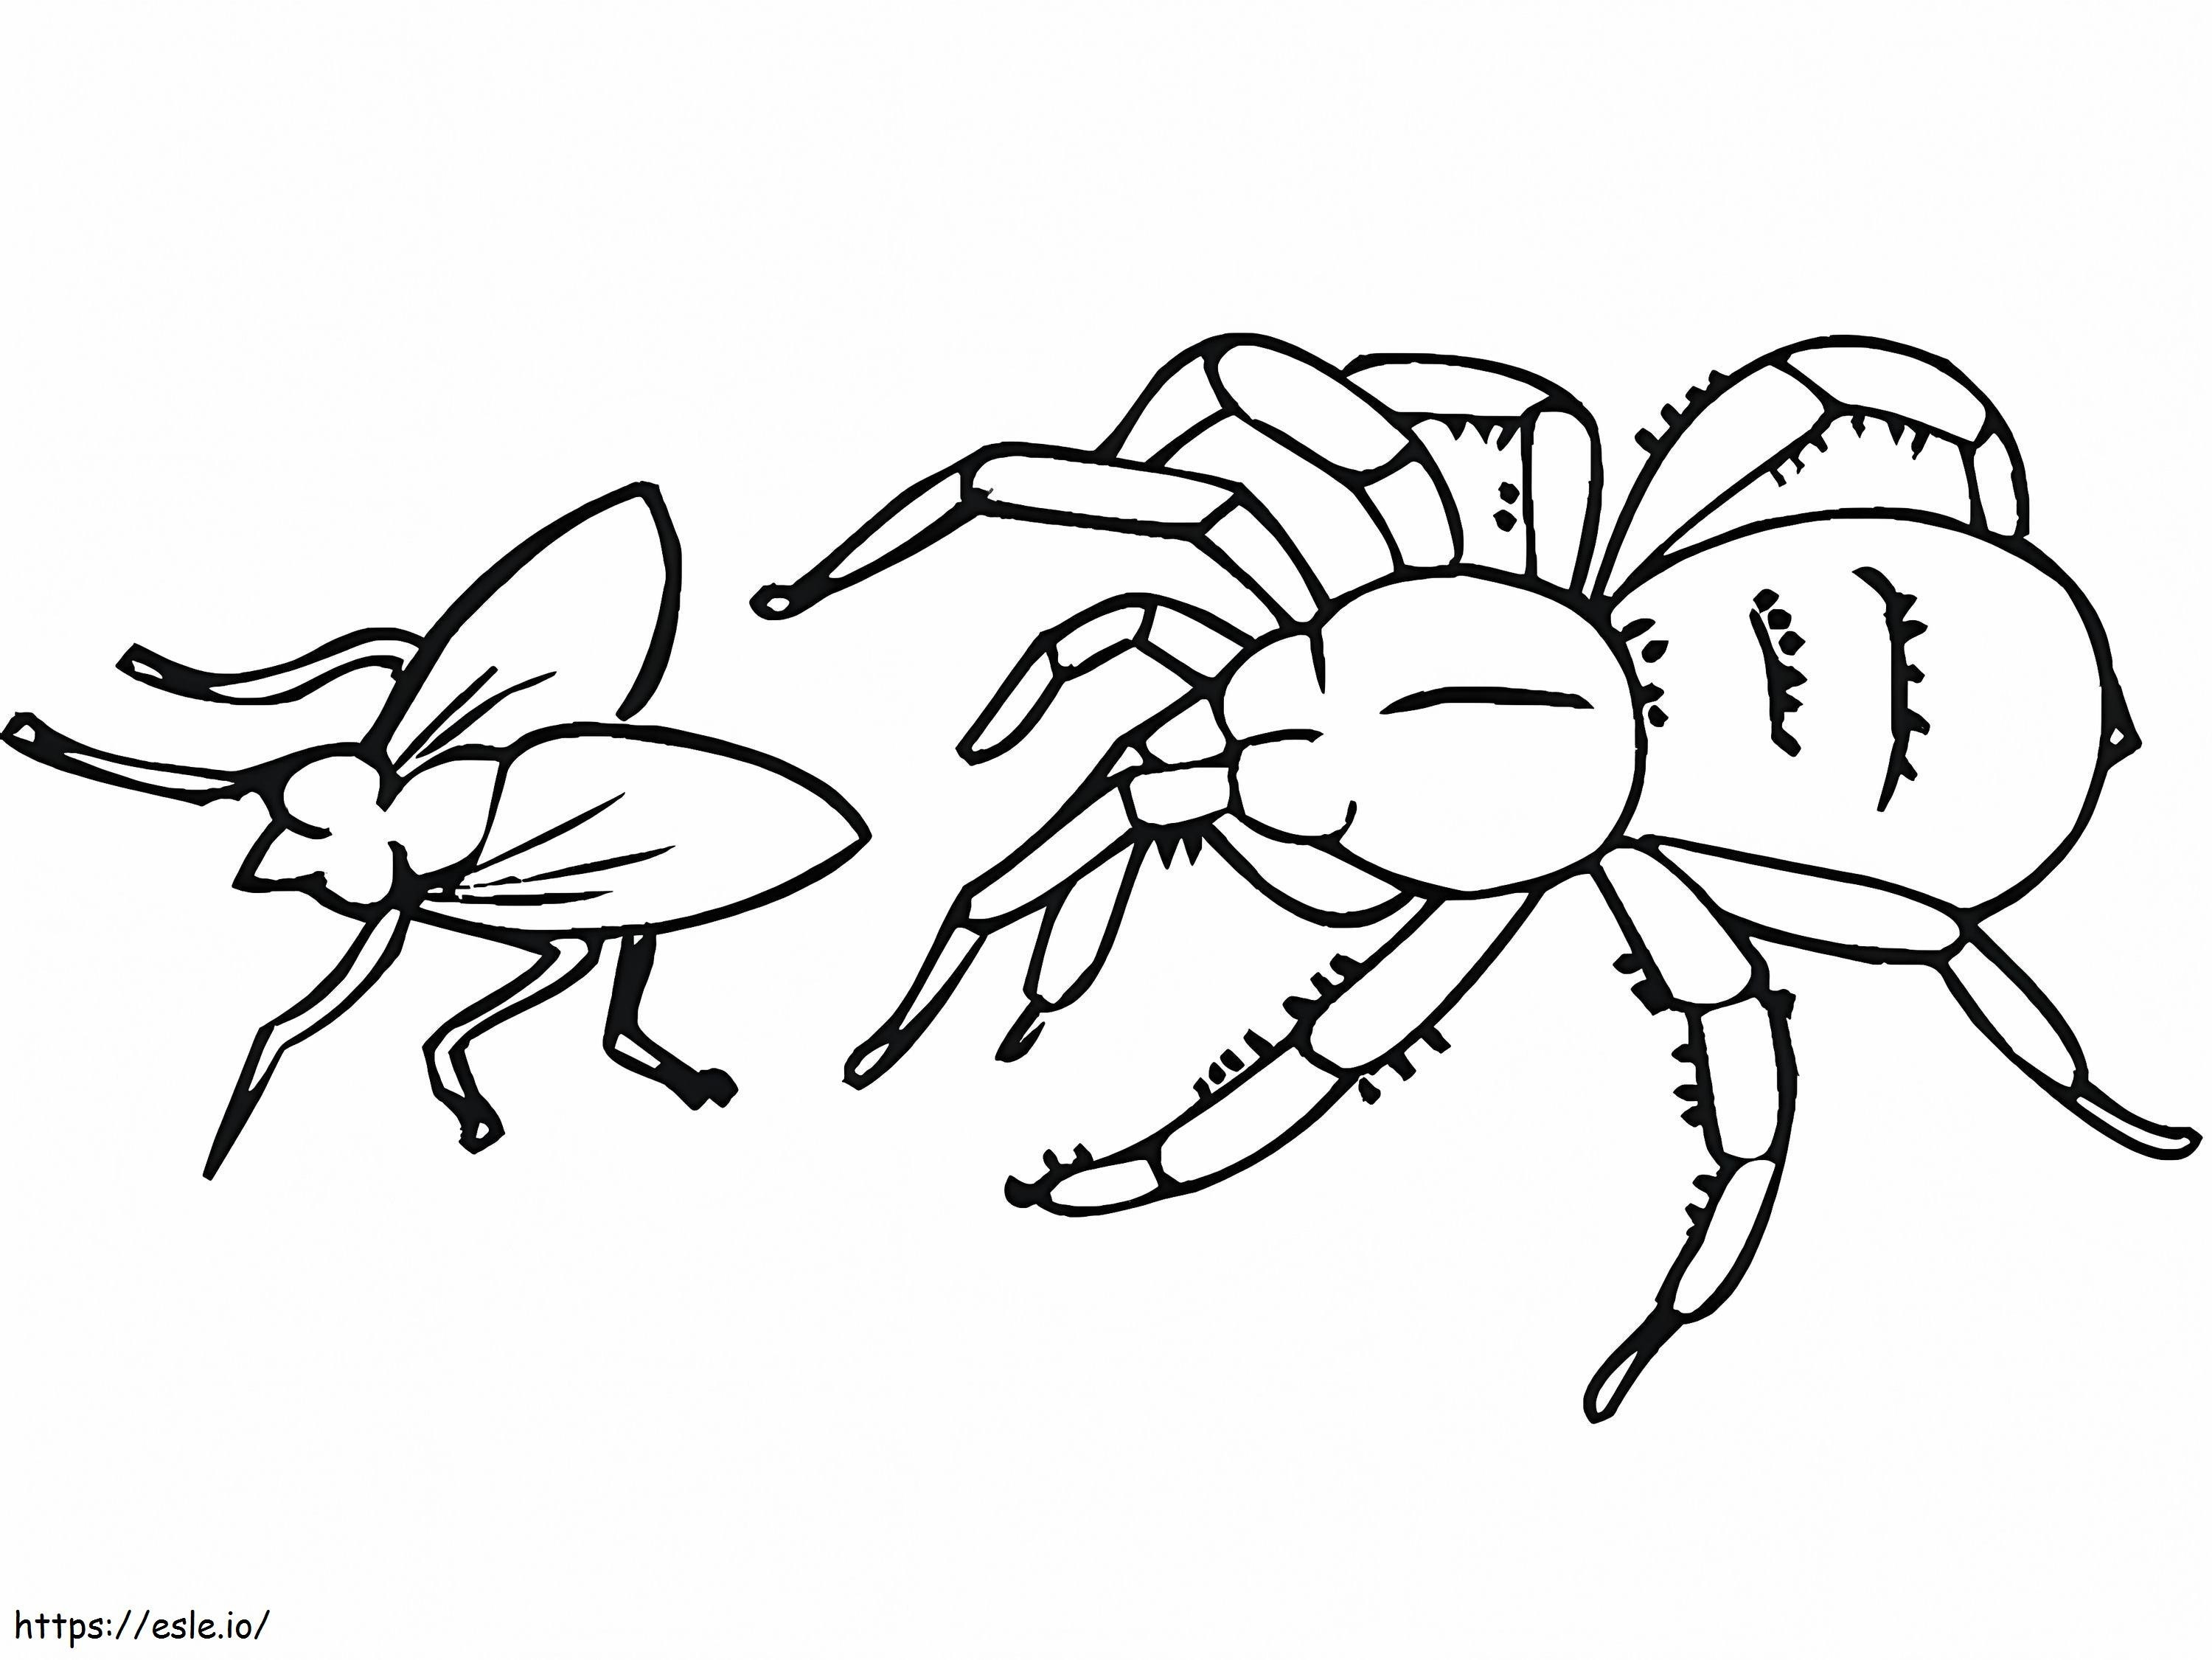 Spider Catching Fly coloring page